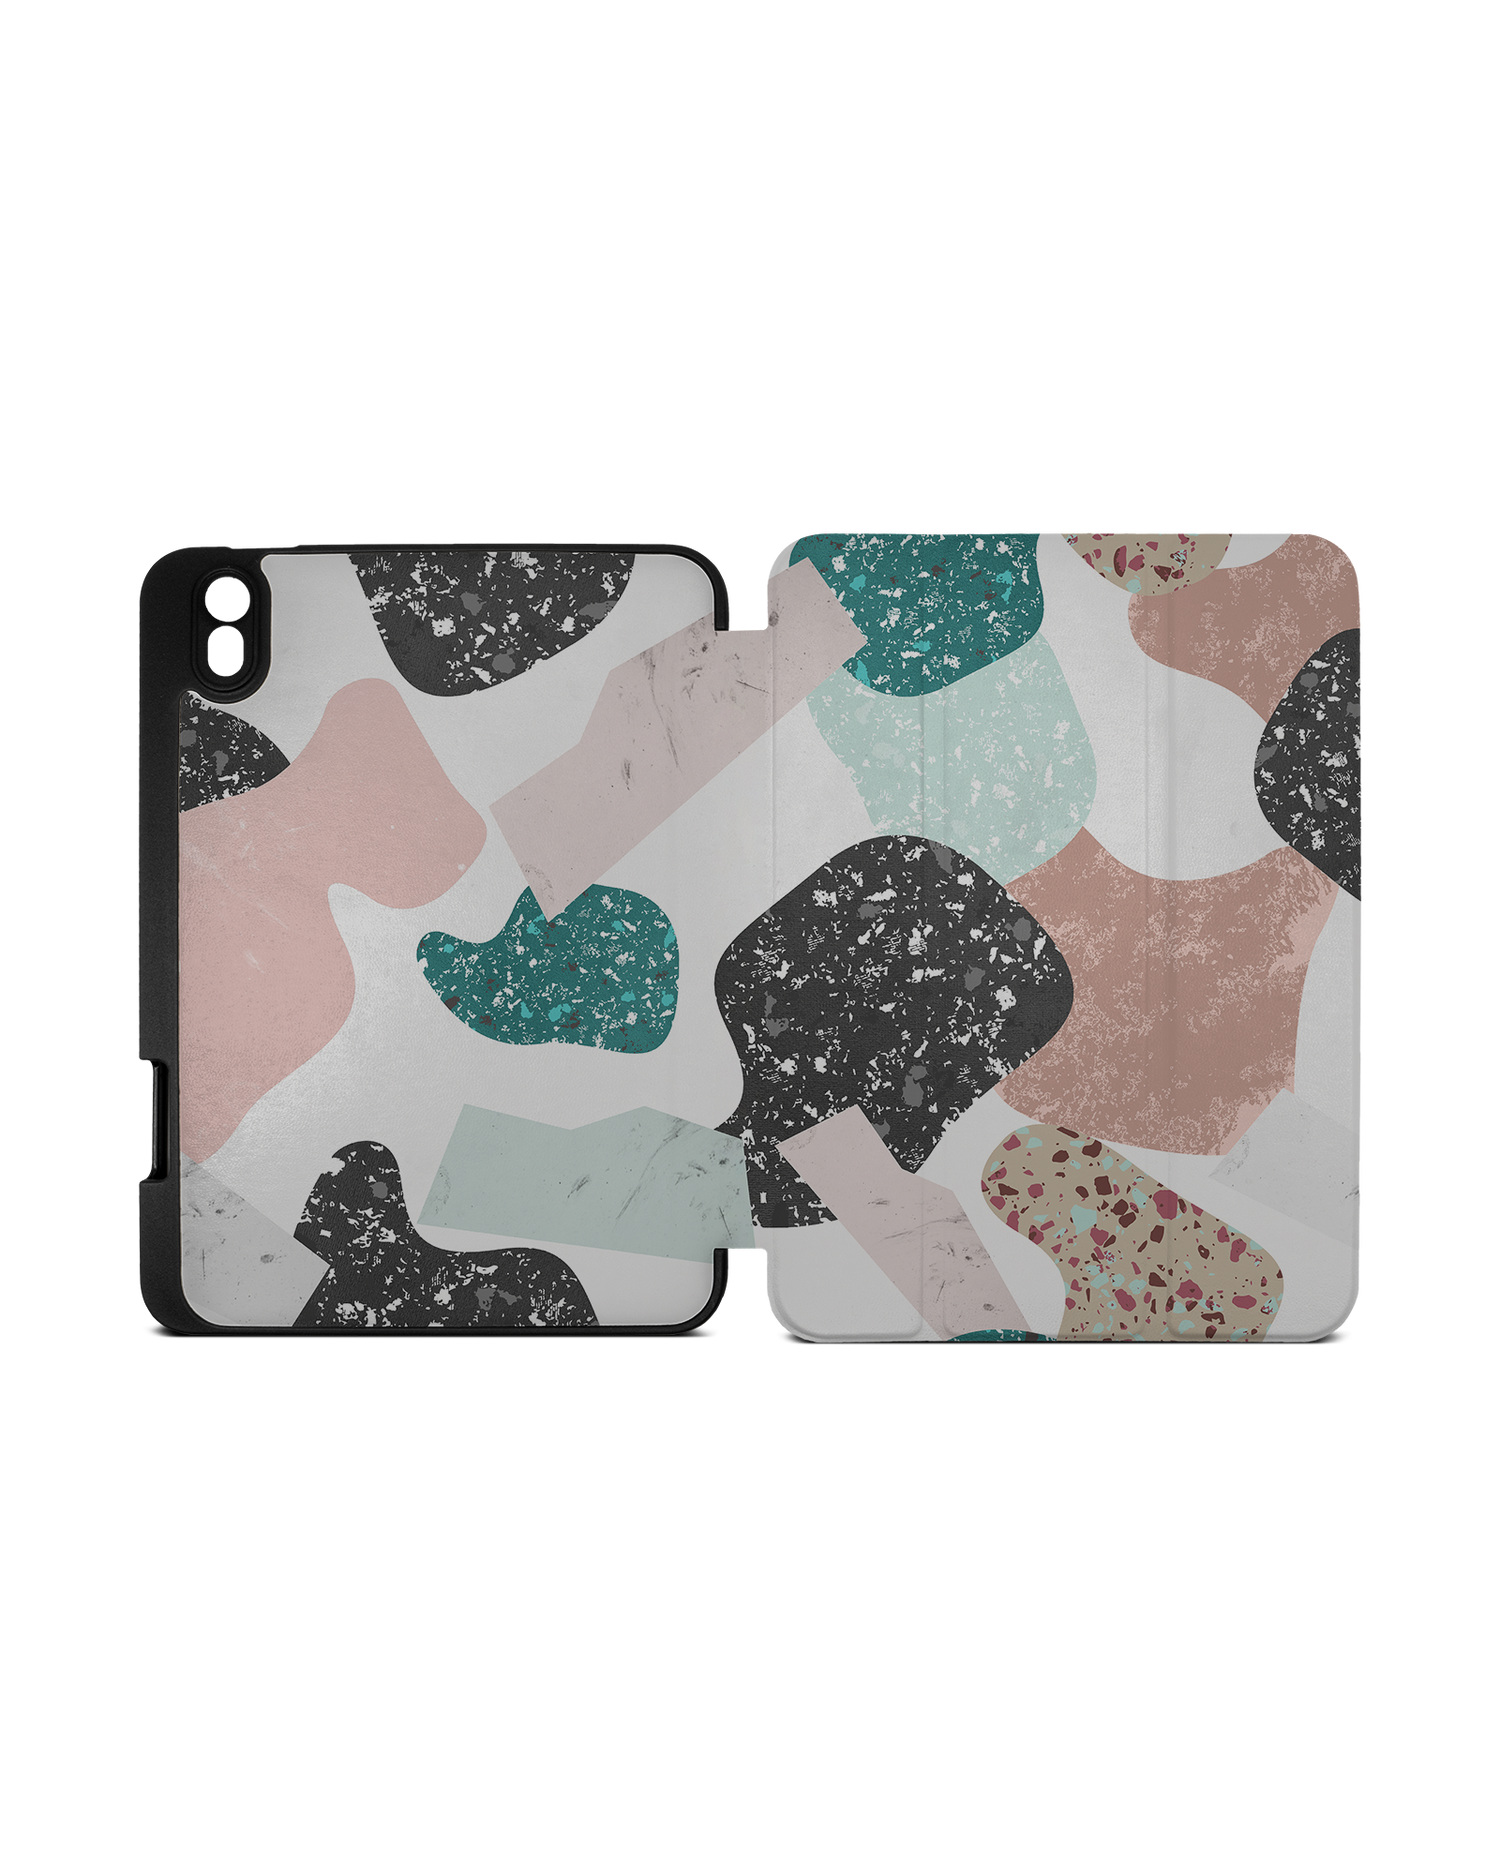 Scattered Shapes iPad Case with Pencil Holder Apple iPad mini 6 (2021): Opened exterior view